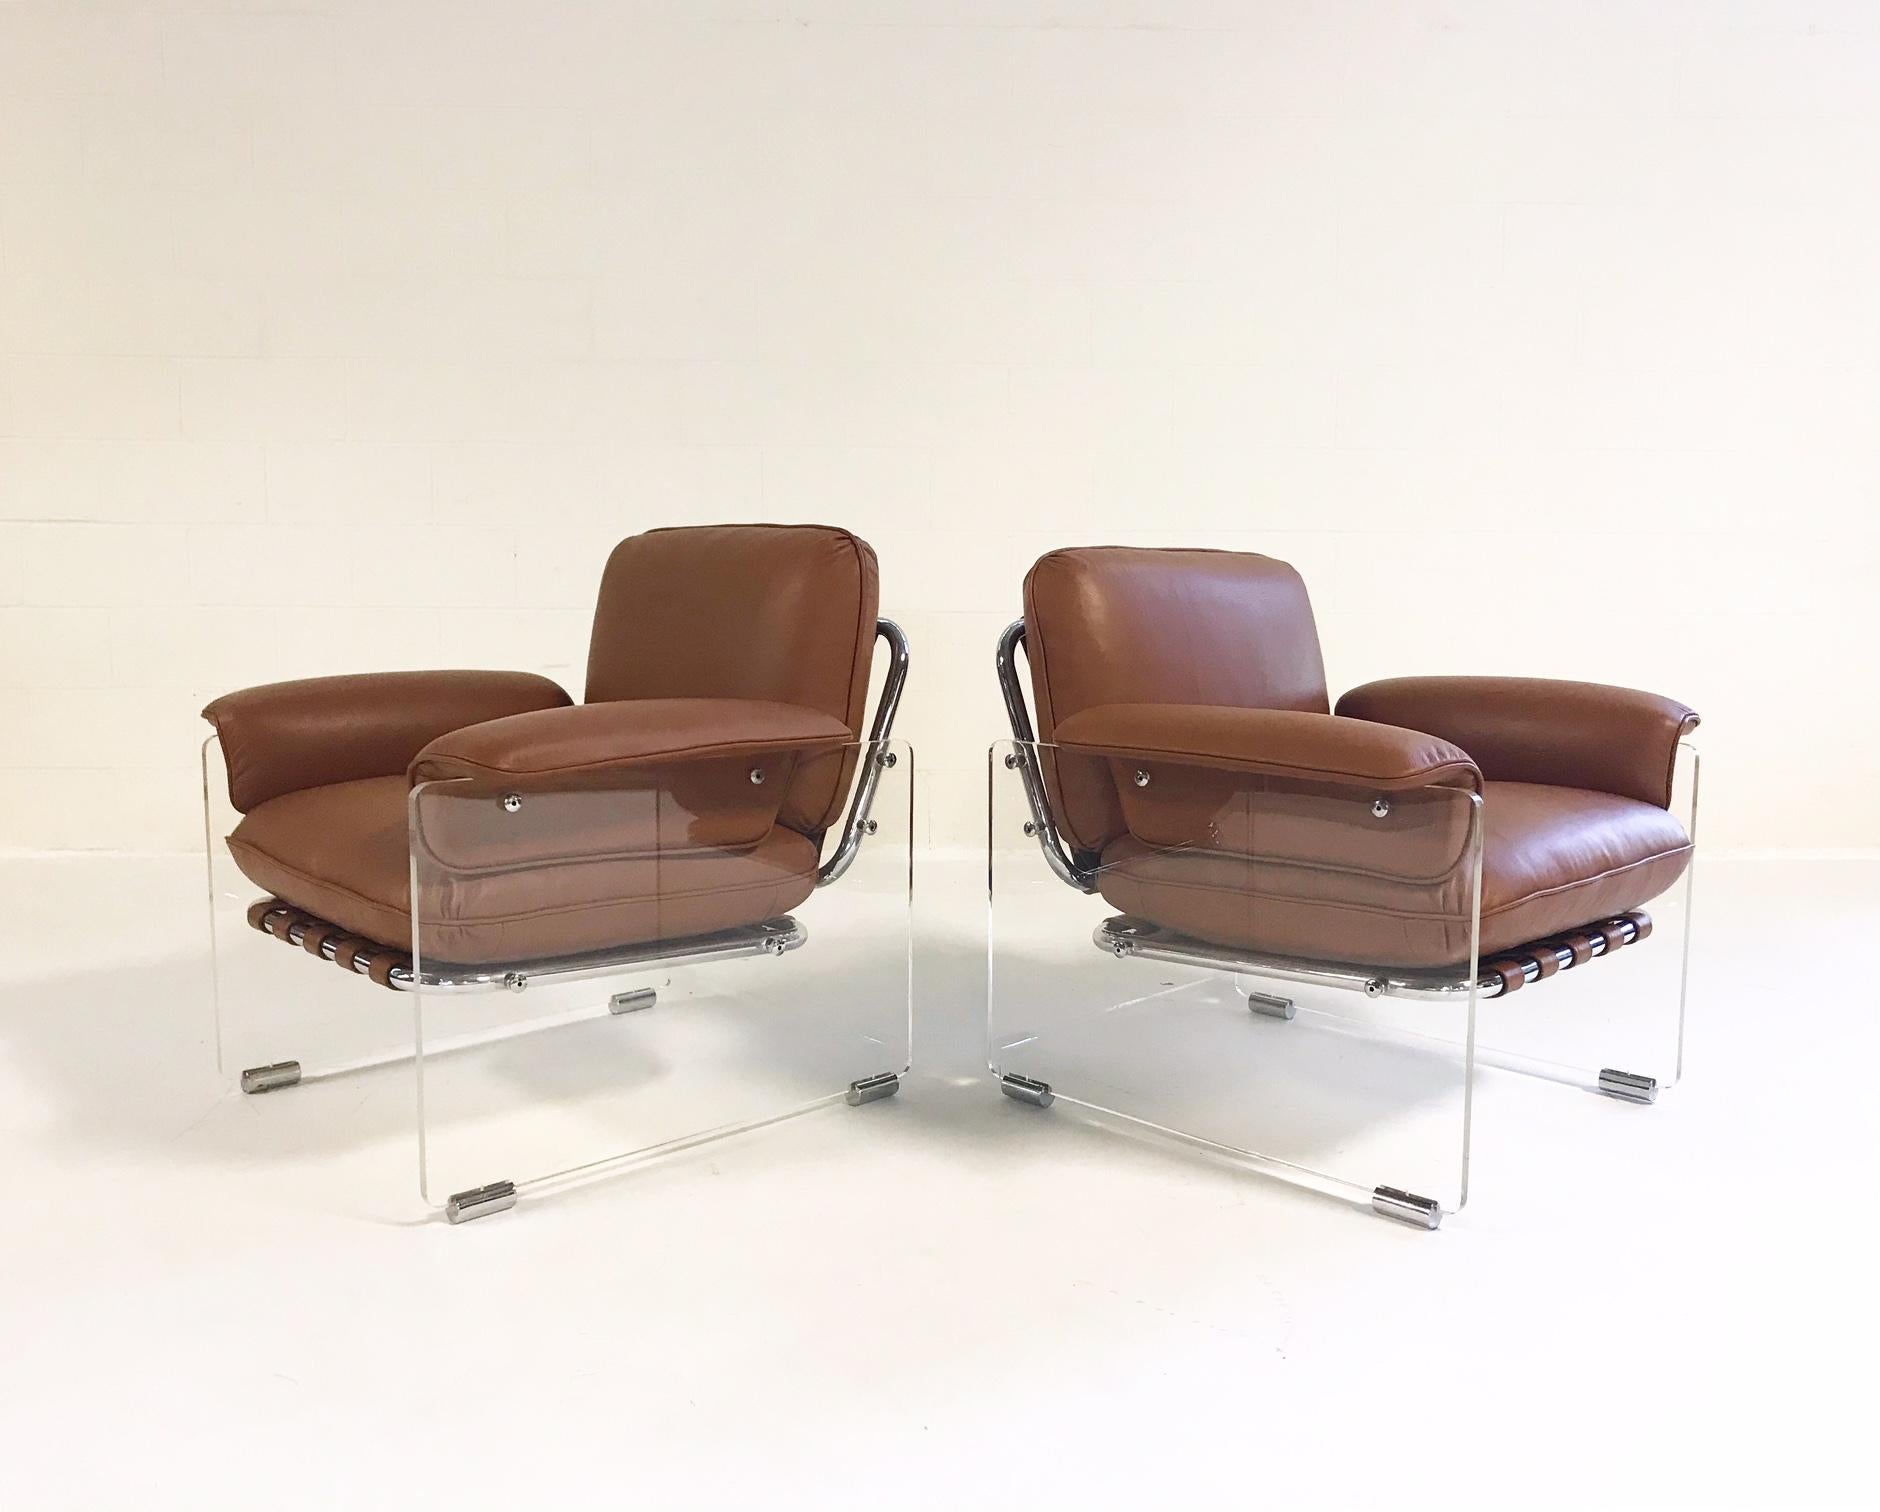 These amazing 1970s Pace Collection lounge chairs feature thick Lucite panels with chrome details. Leather straps wrap the tubular chrome frame to support the cushions. The loose cushions and straps have all been masterfully created and upholstered